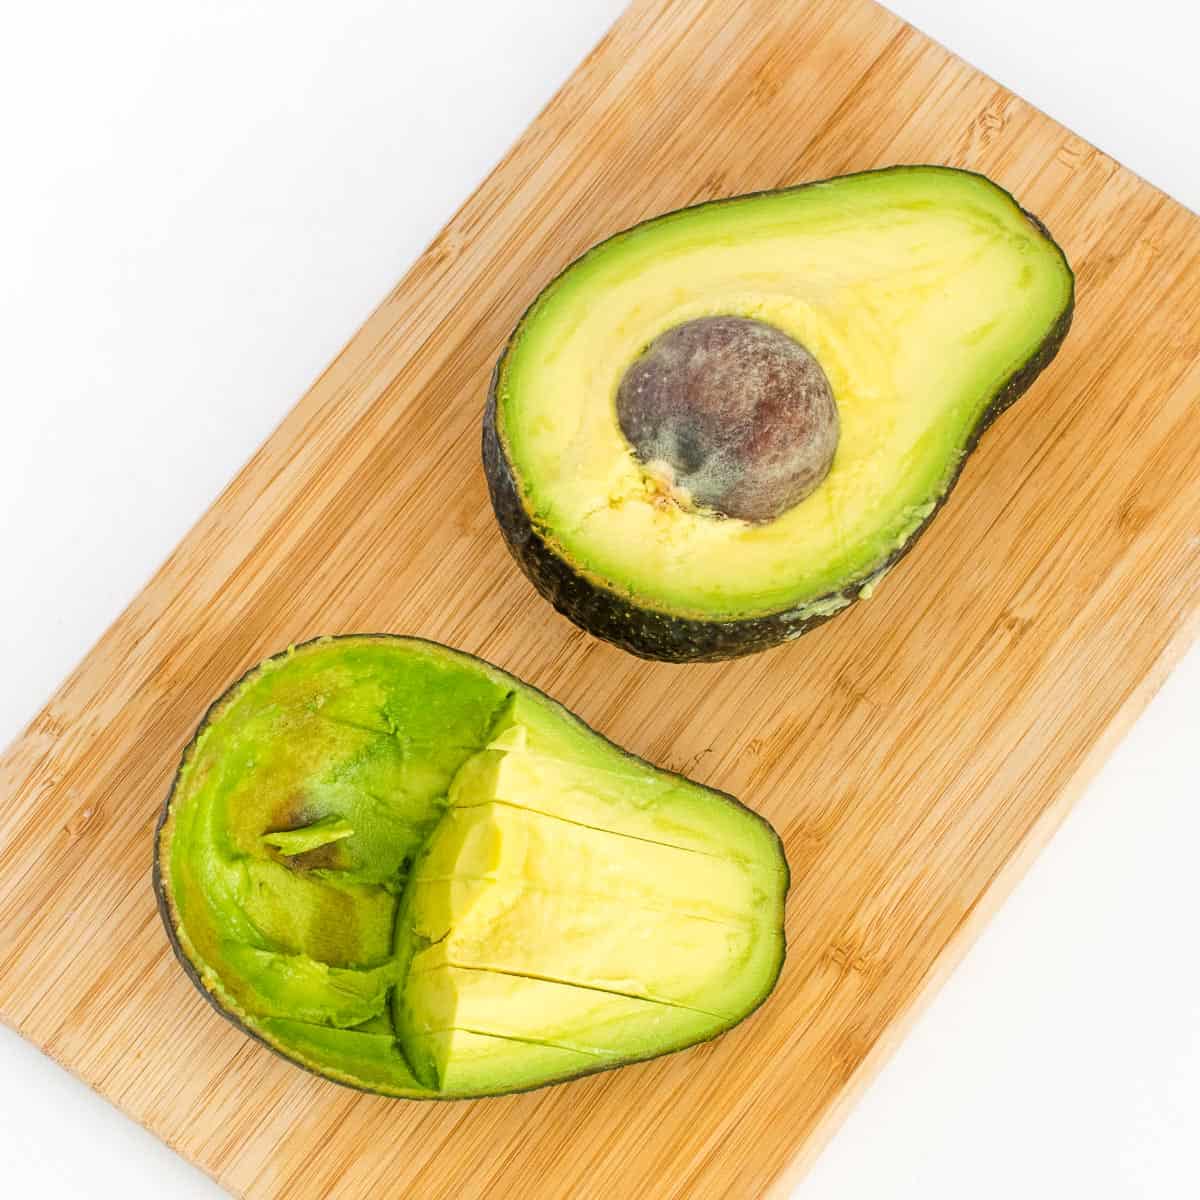 steps to slice avocado for the fries. 